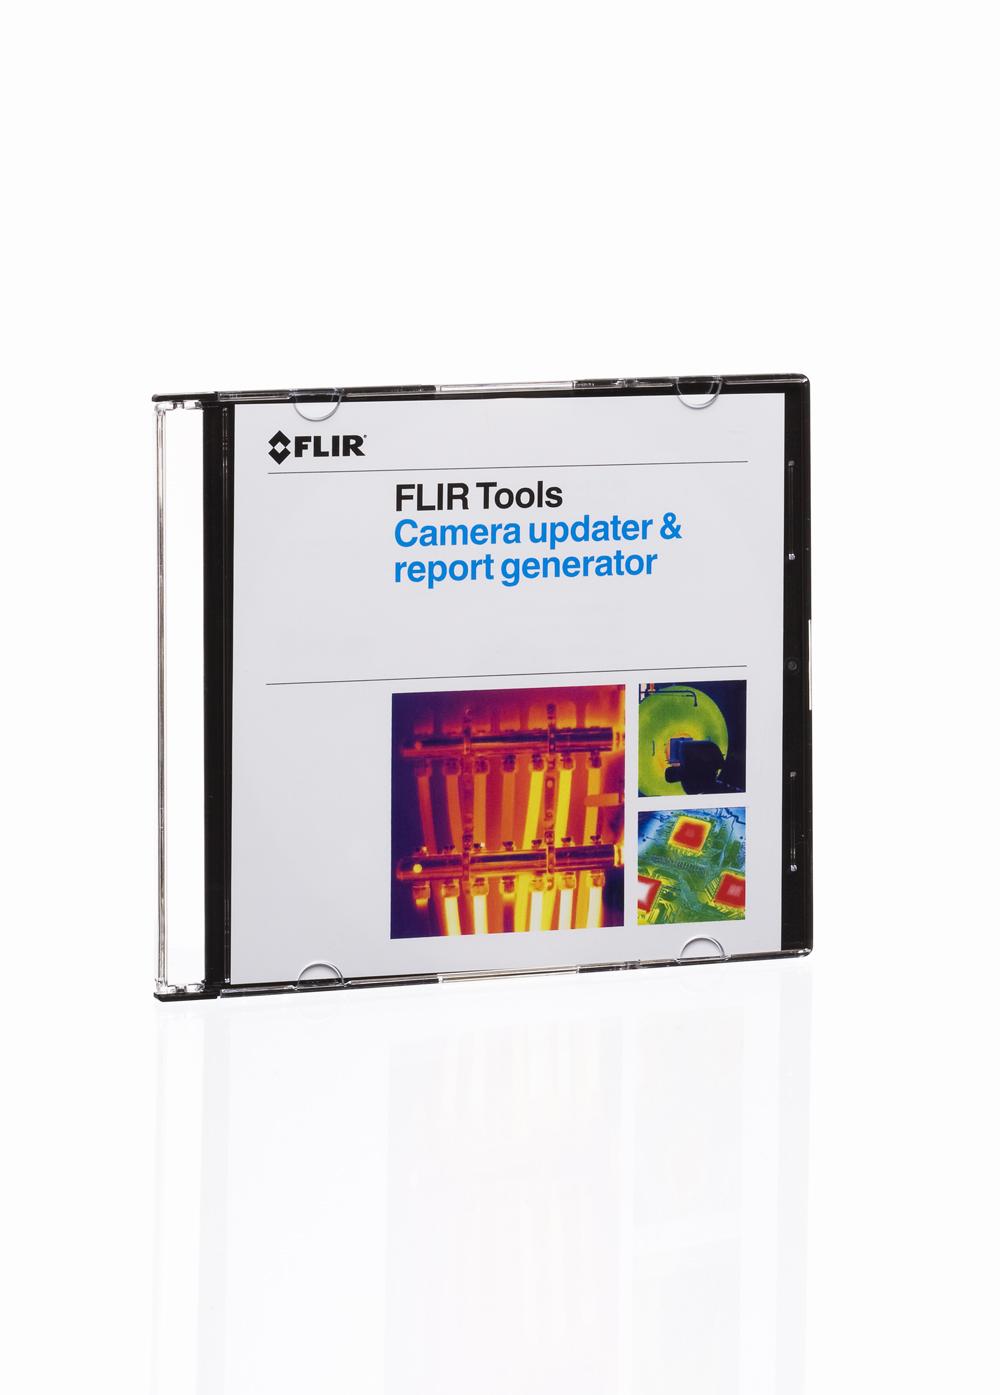 Optional Software T197965; FLIR Tools FLIR Tools is a software suite specifically designed to provide an easy way to update your camera and create inspection reports.